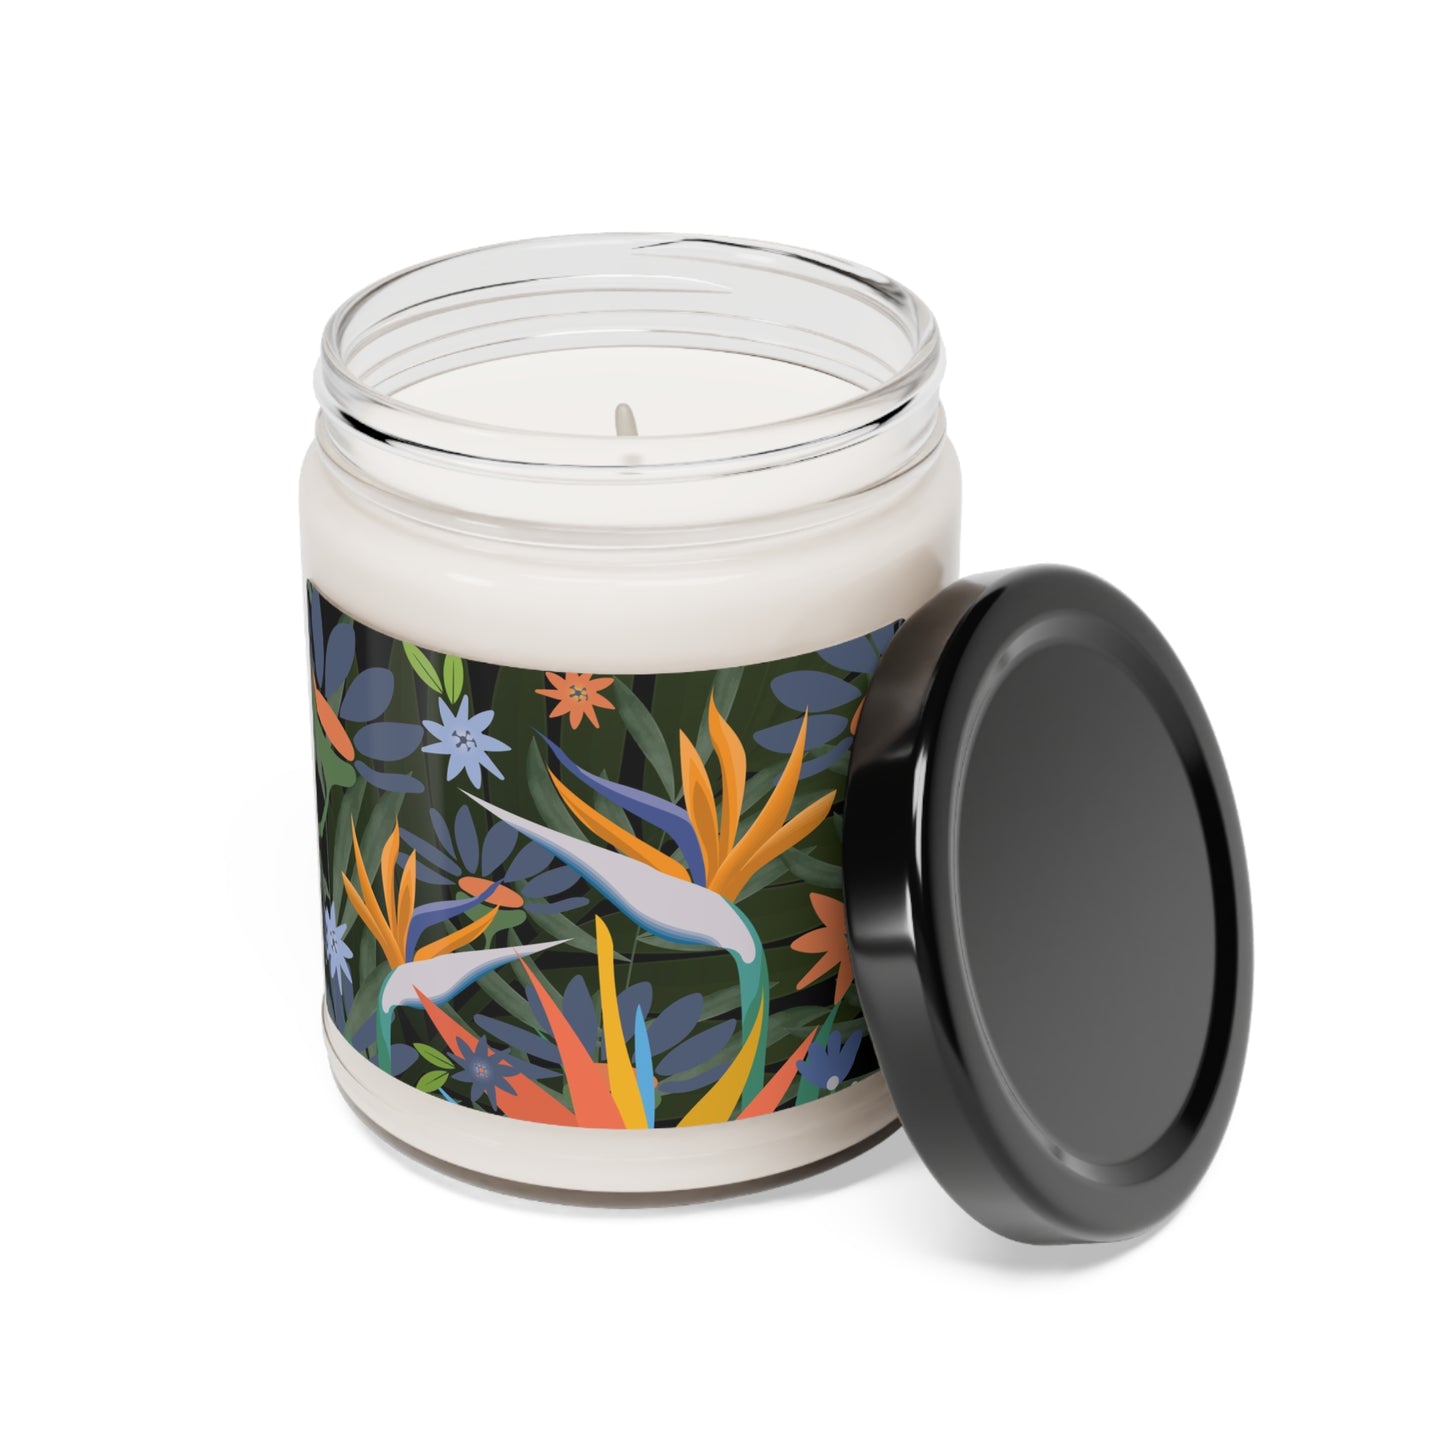 Bird of paradise Scented Soy Candle, 9oz, Tropical Boho Scented Candle, Home Gift Idea!